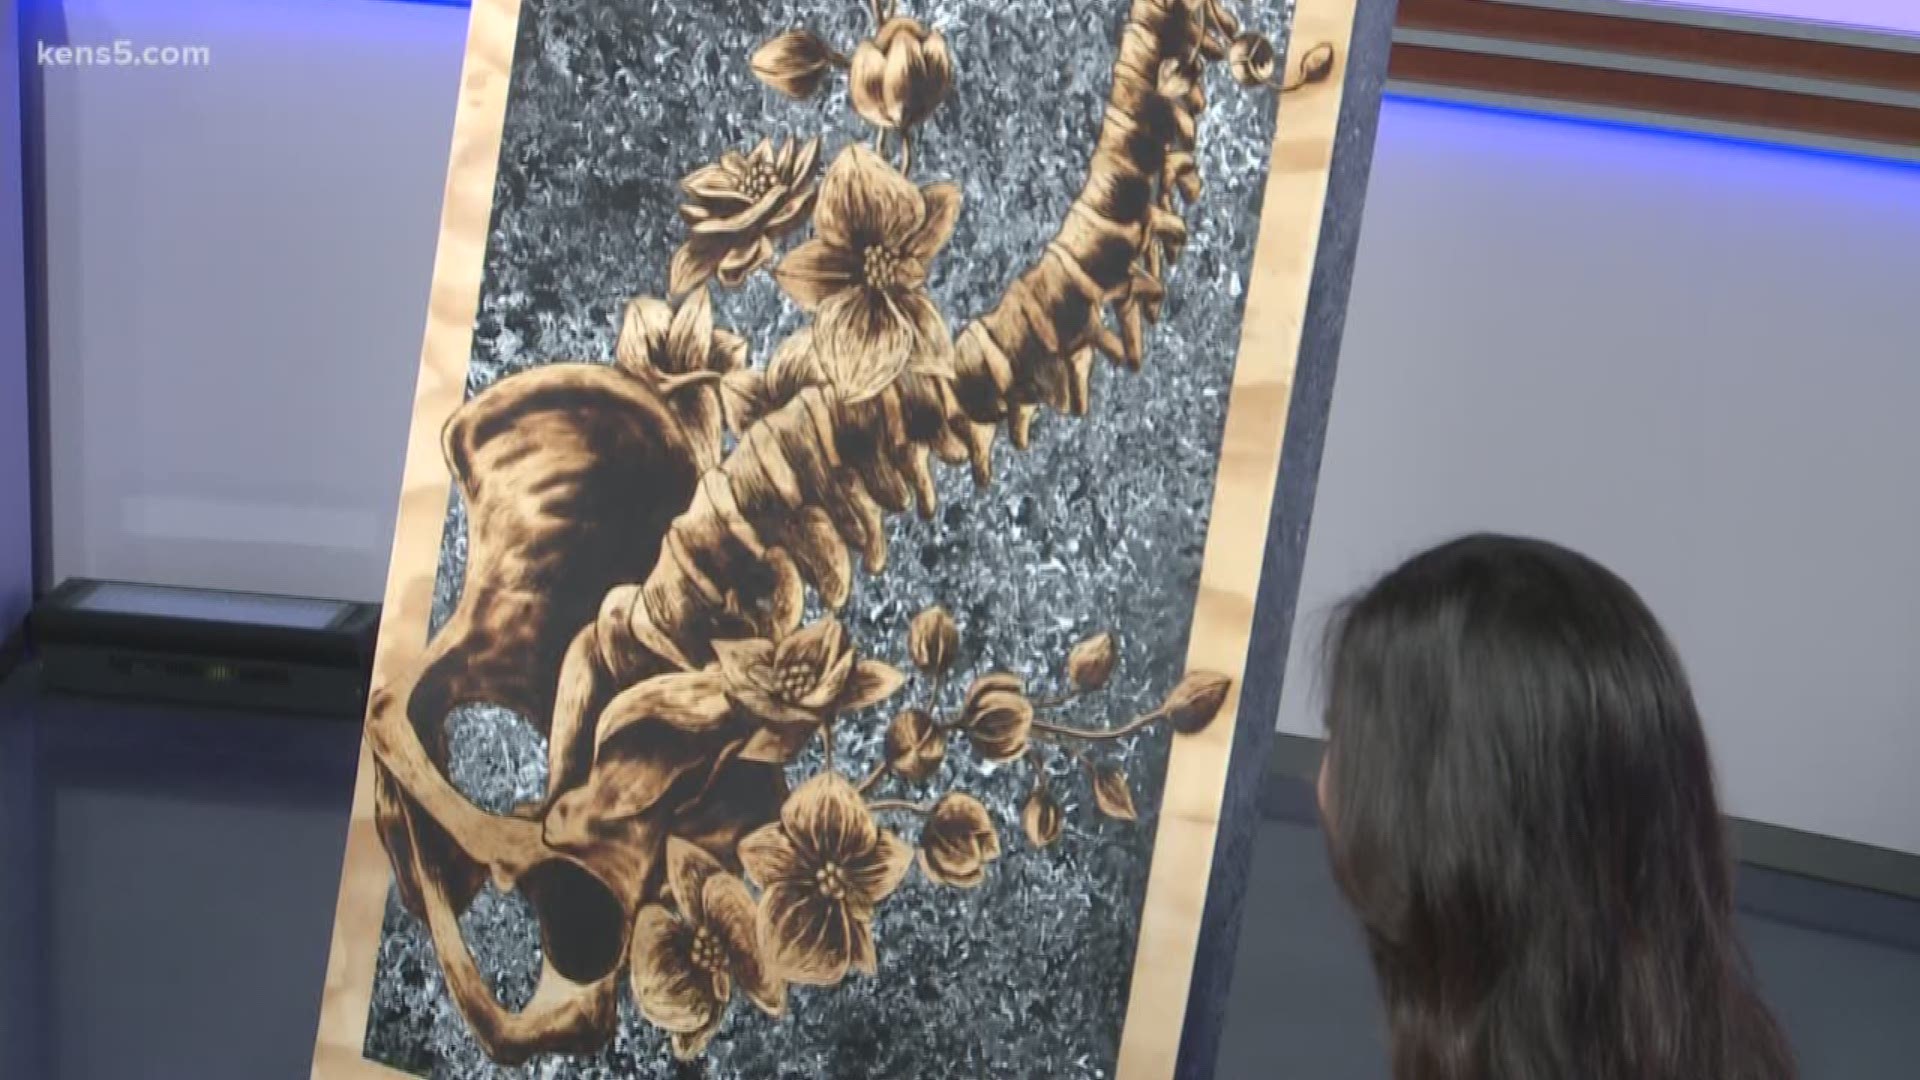 Ethan Farmer joins KENS 5 in studio to share his vision for his one-of-a-kind artwork.